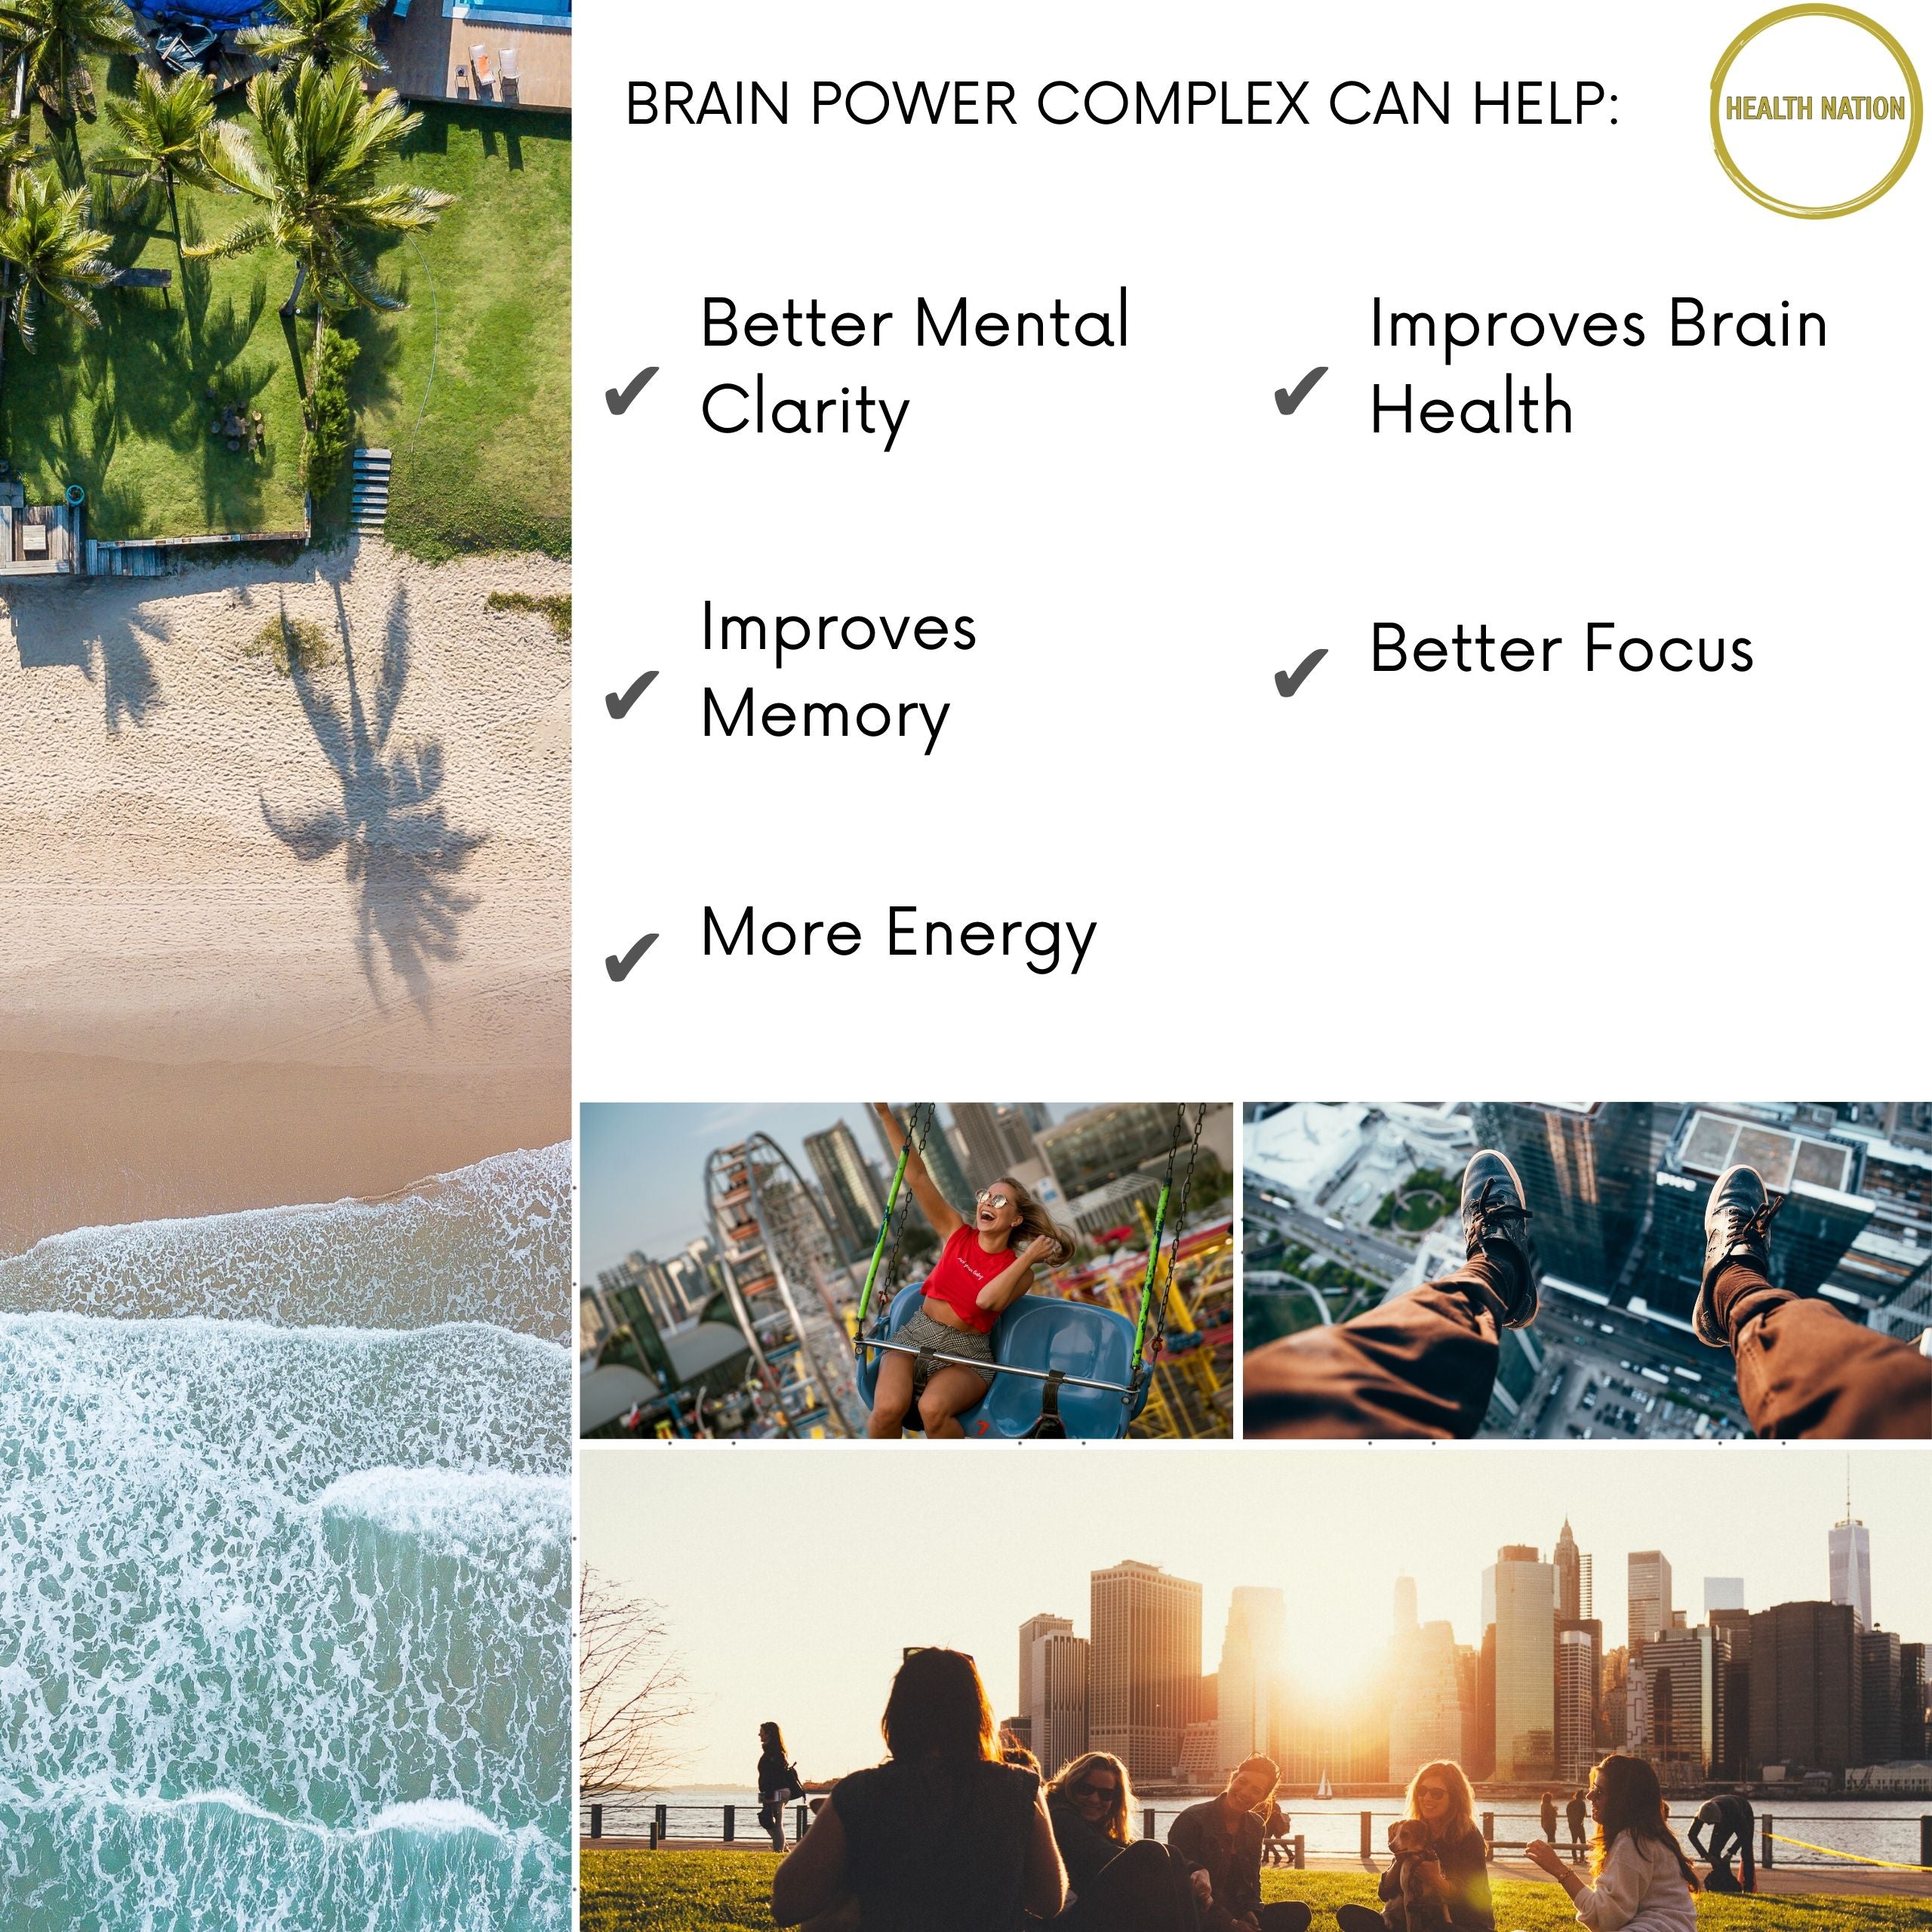 Brain Power Complex | Helps with Mental Clarity and Cognitive Function | Made in UK | 90 Capsules - Health Nation